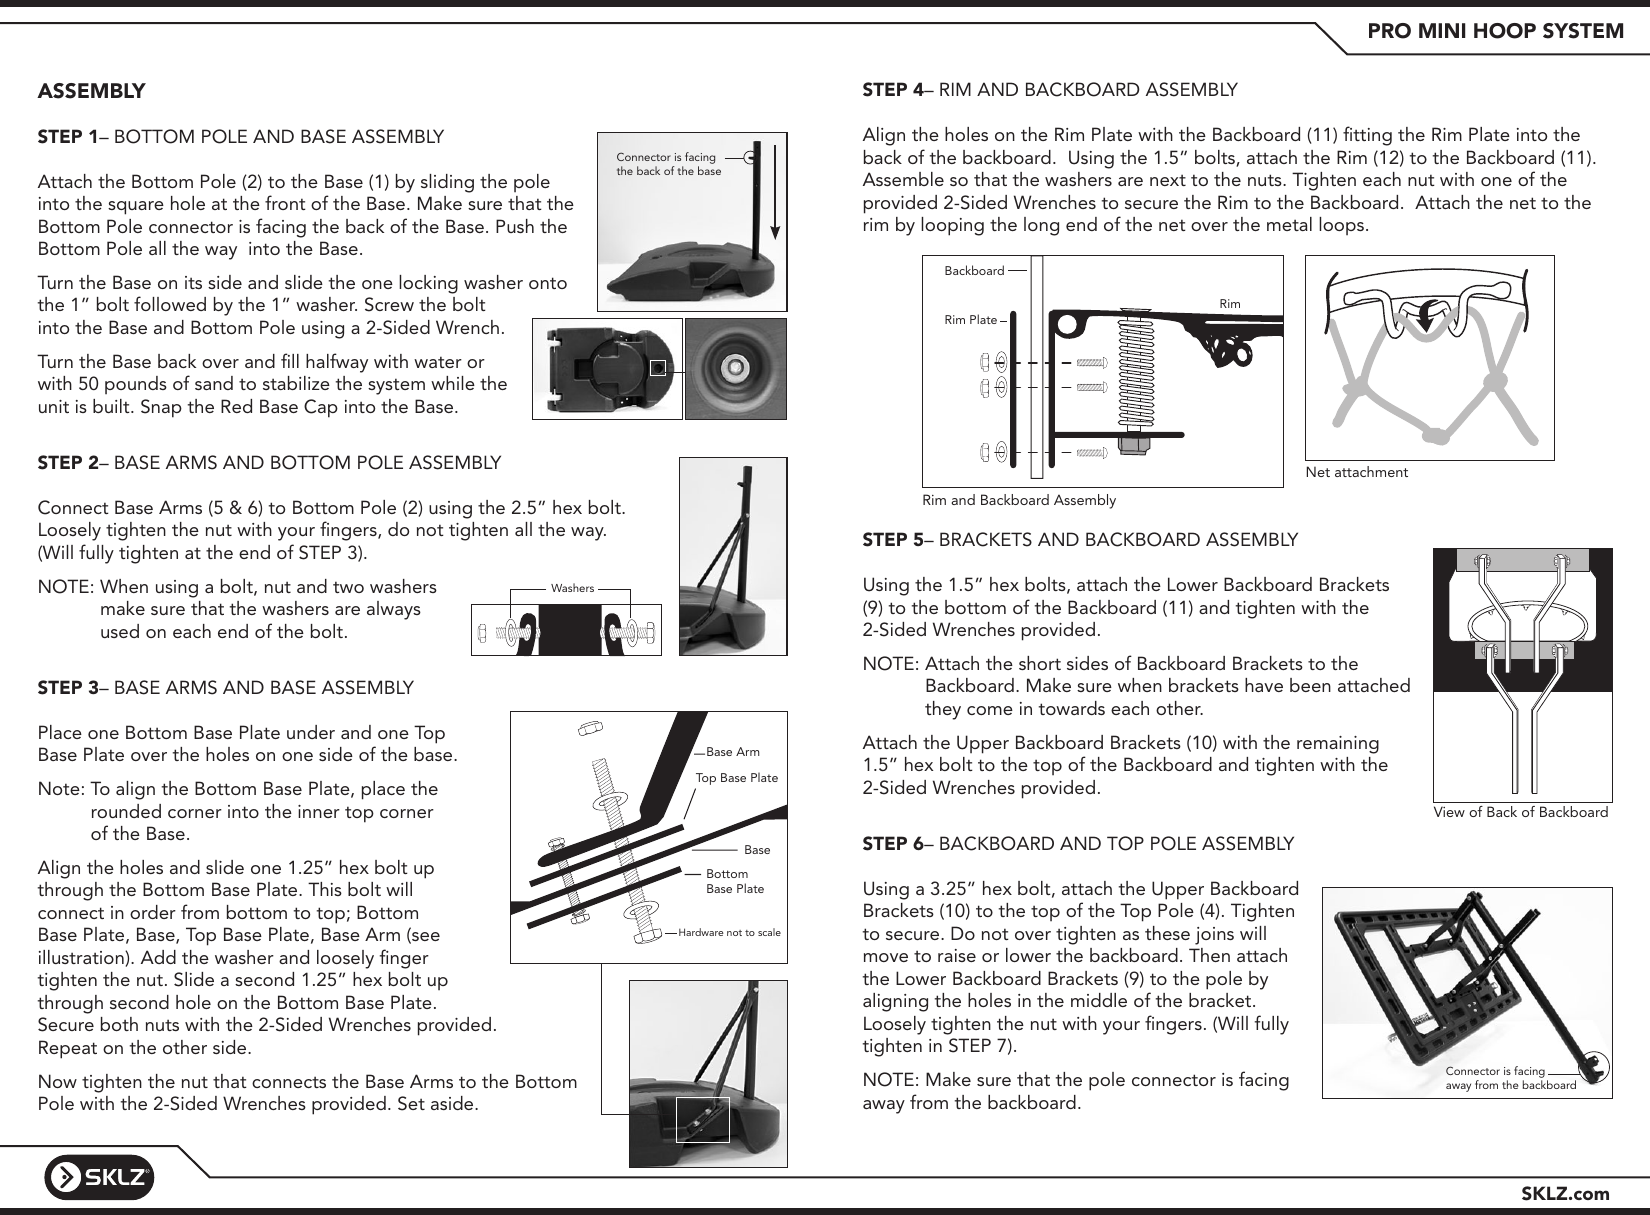 Page 3 of 5 - Pro Mini Hoop System Instructions